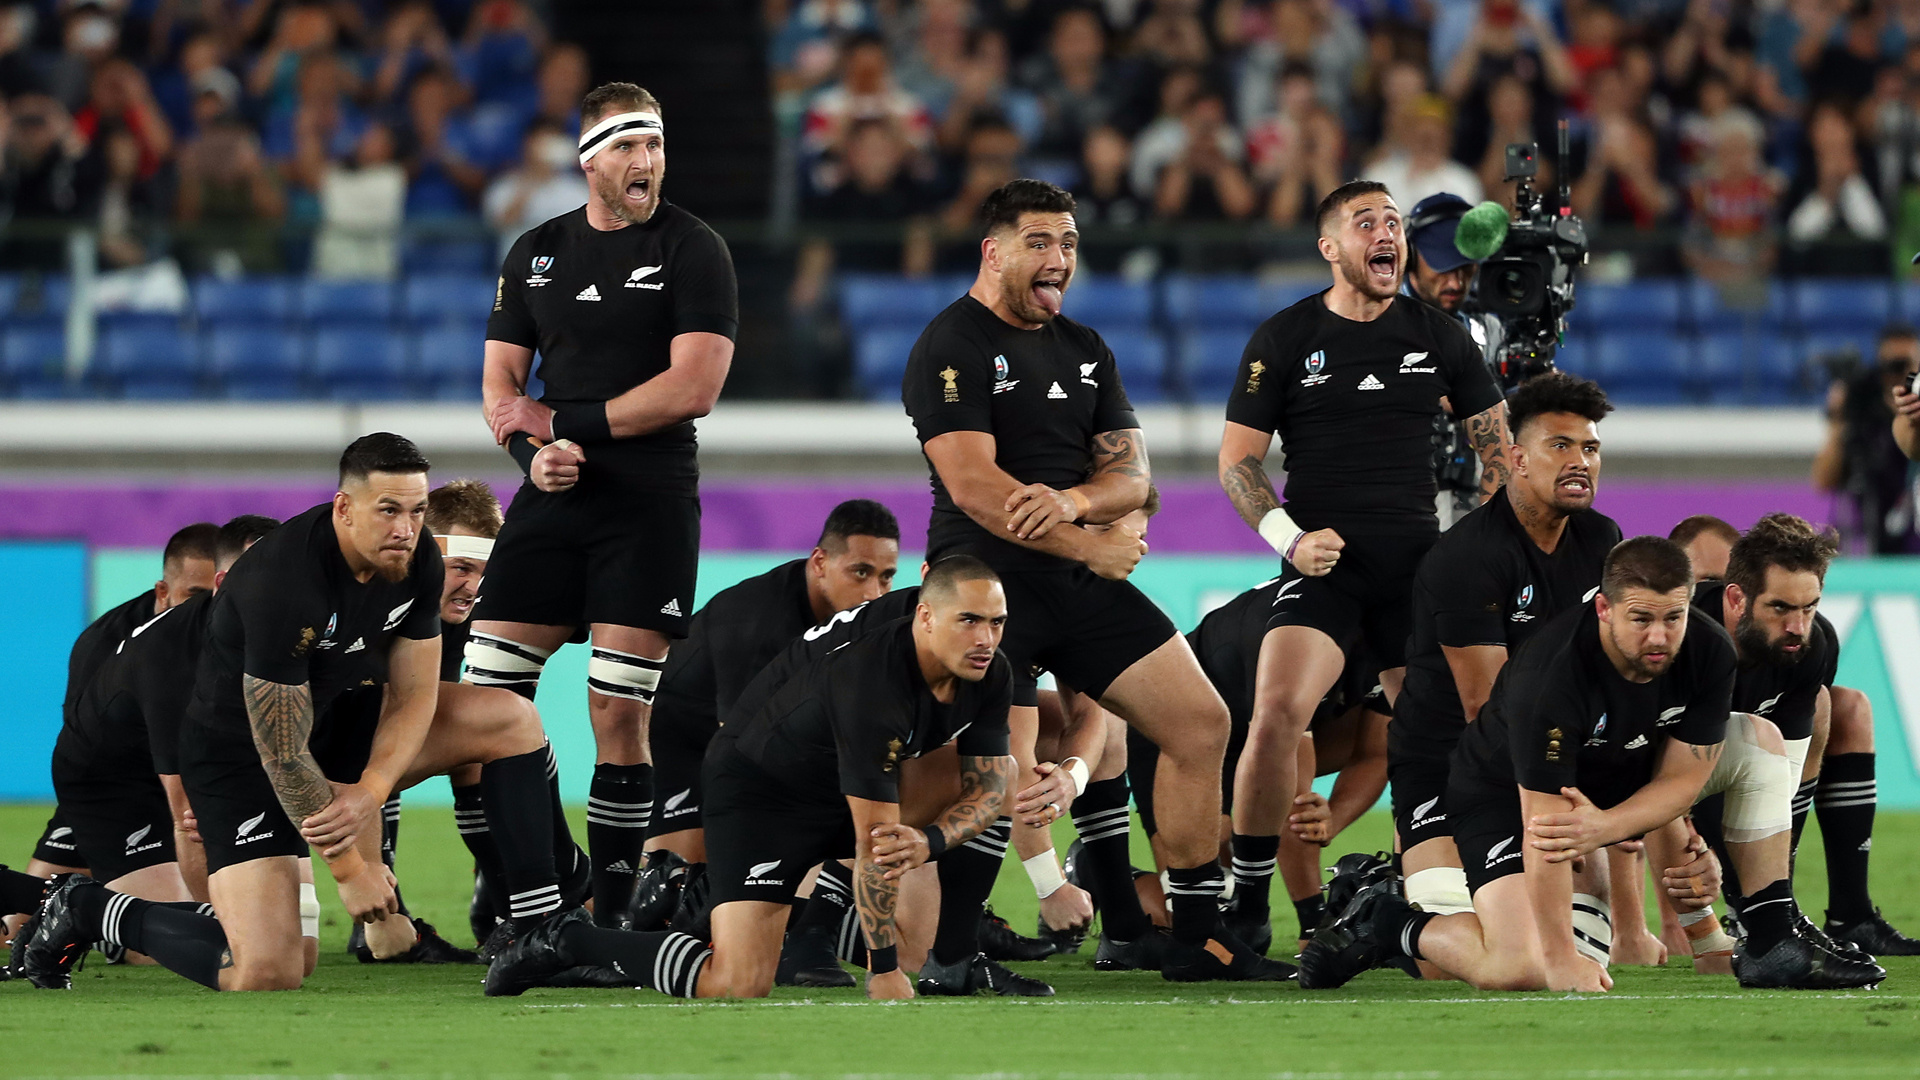 Haka: All Blacks,  Performance at Eden Park in 2021, The first game of the Bledisloe Cup. 1920x1080 Full HD Background.